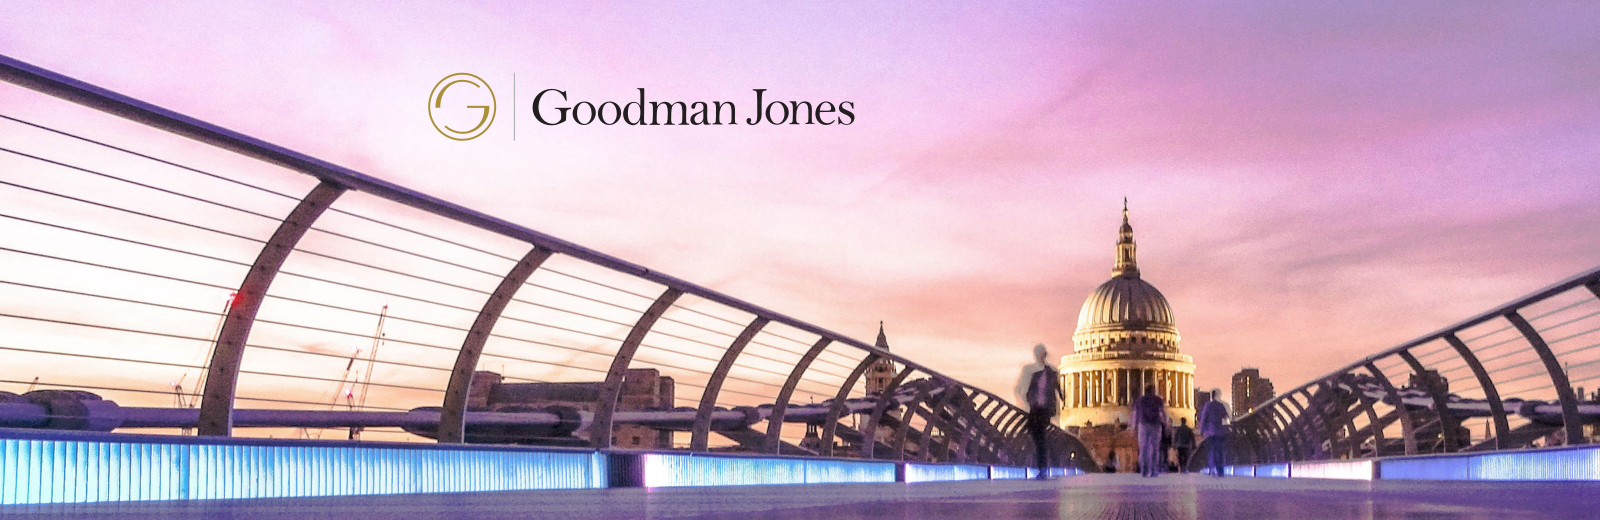 St Paul's Cathedral and Goodman Jones logo